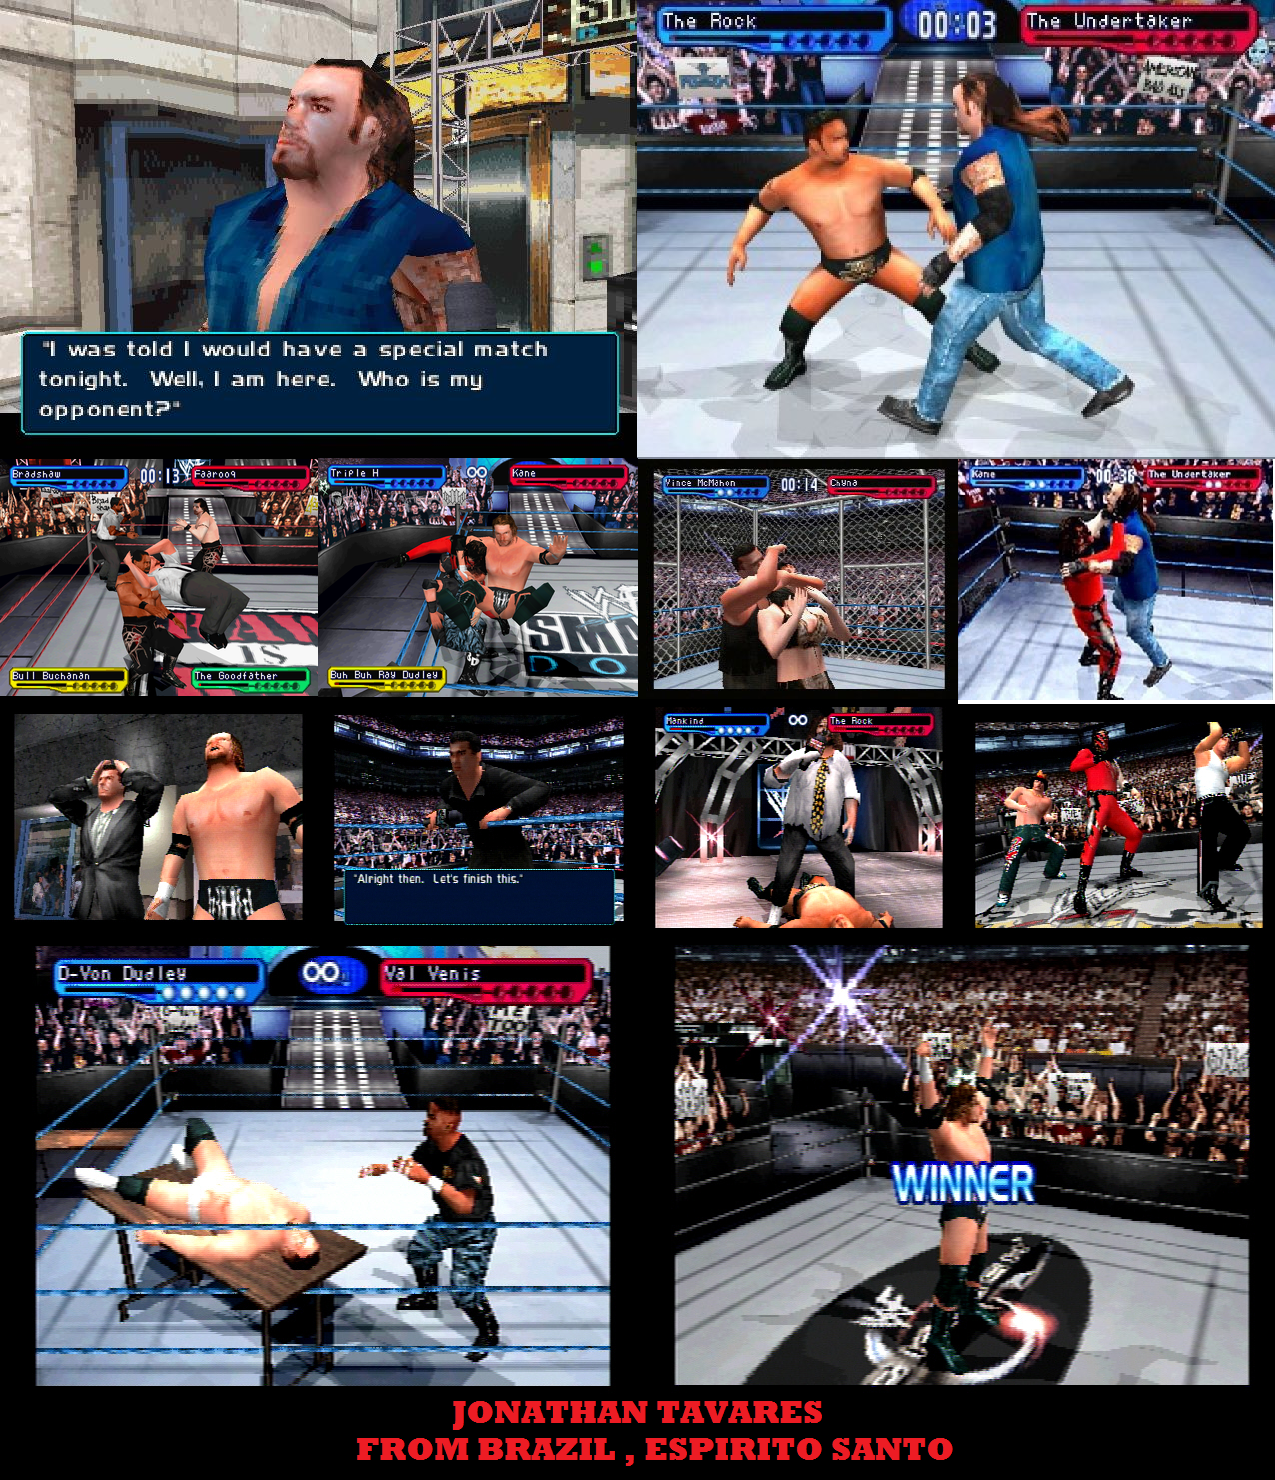 WWF Smackdown! 2 - Know Your Role for psx screenshot